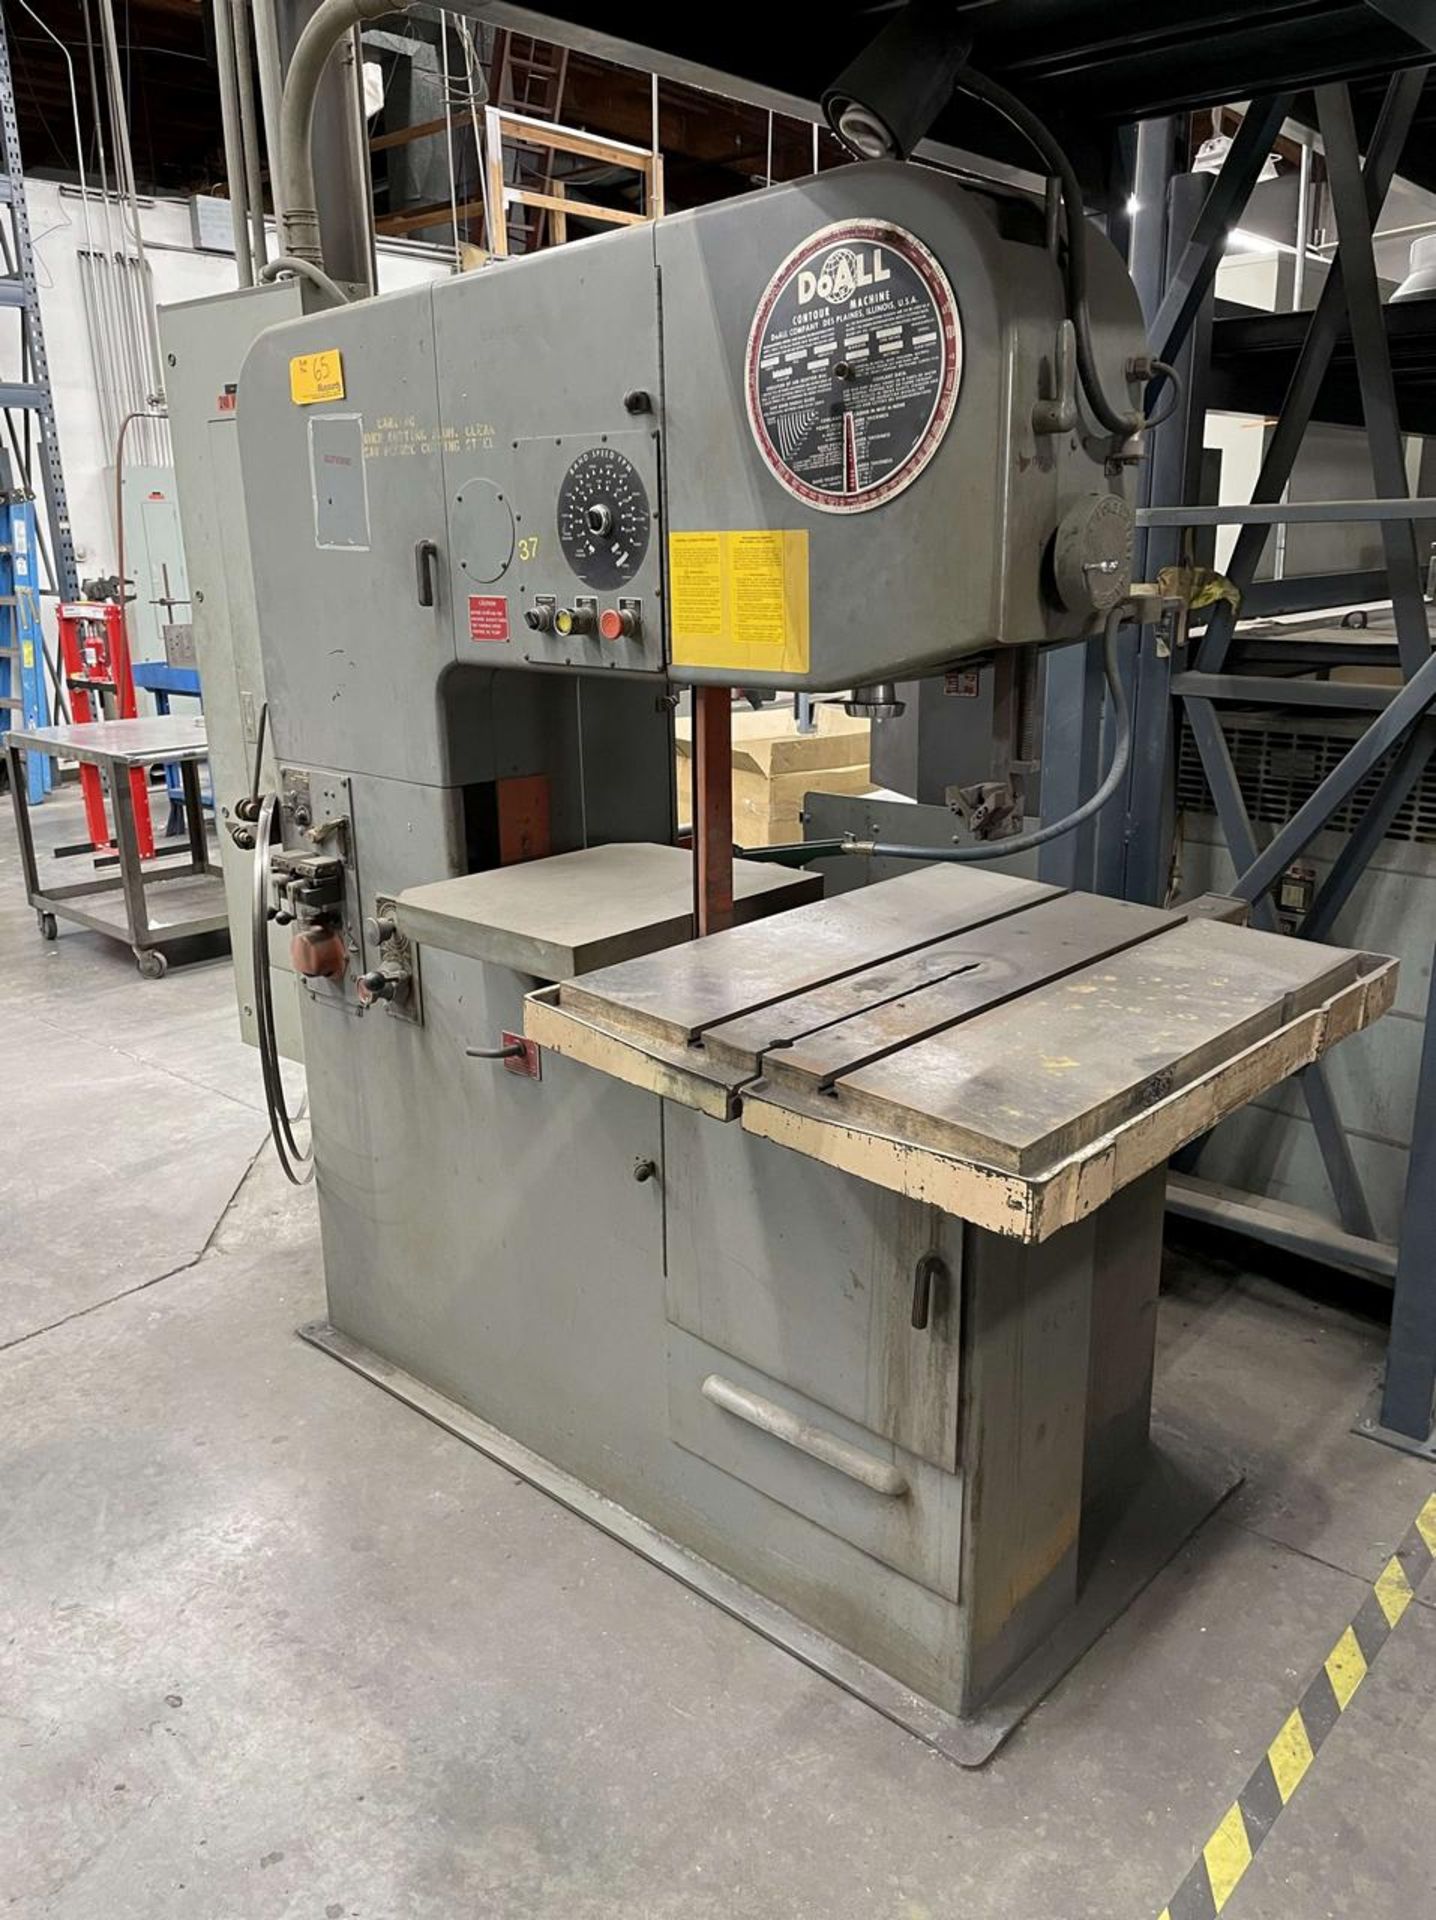 DoAll 36" Vertical Band Saw (Model 3612-2H) - Image 2 of 5